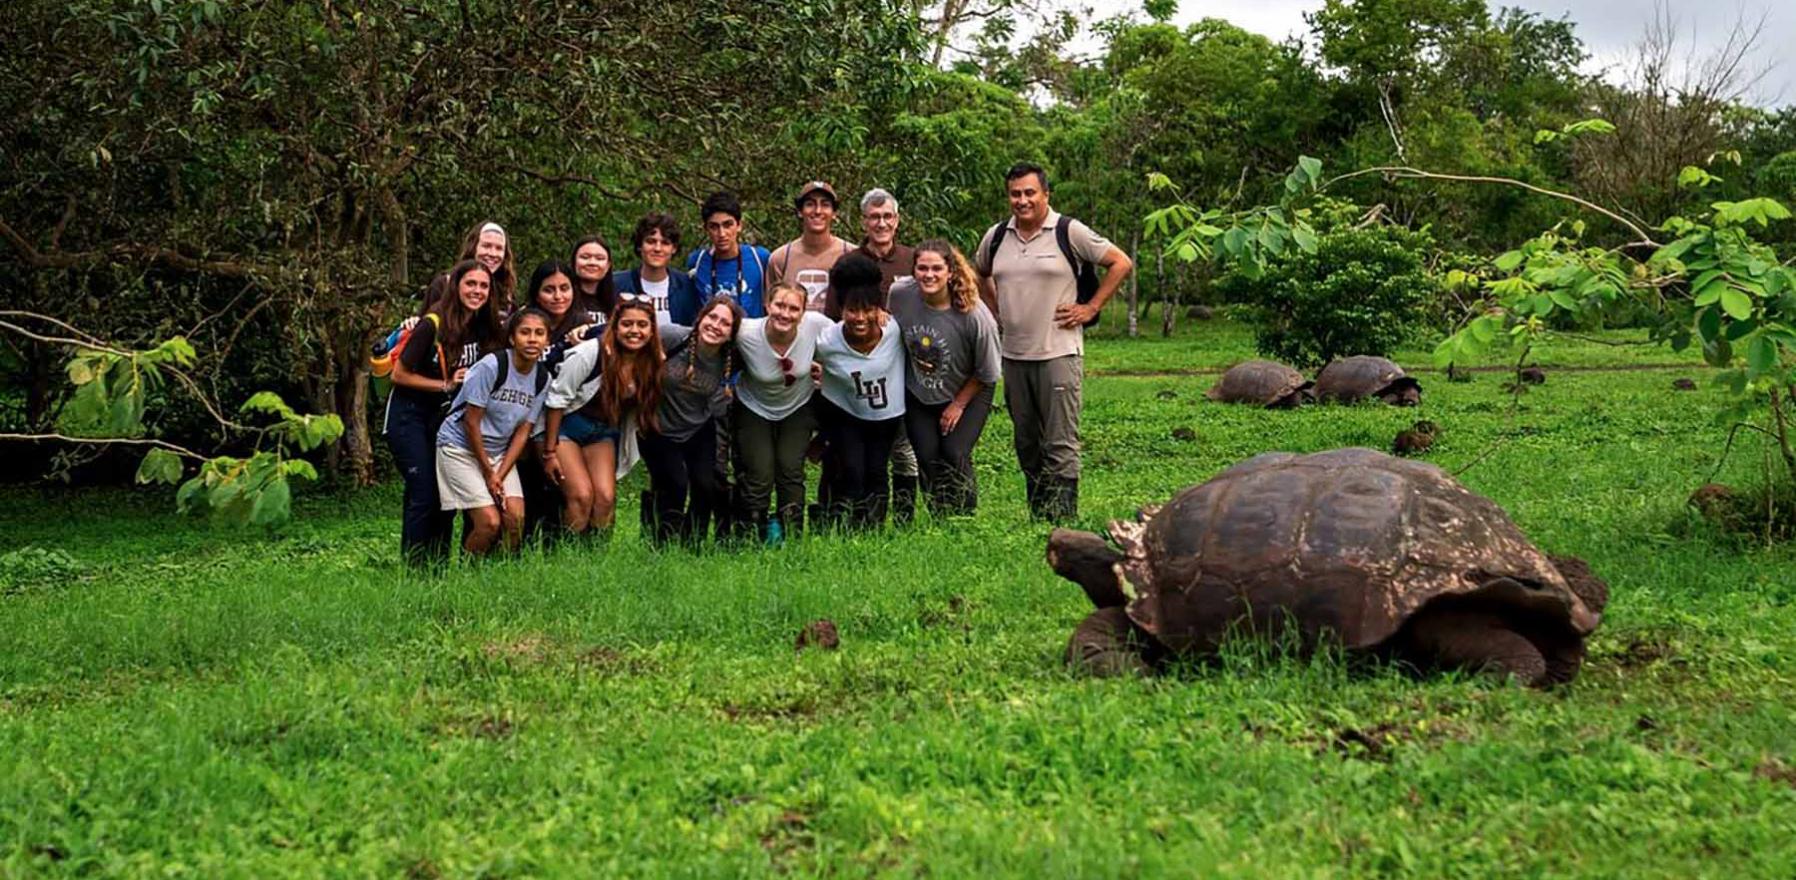 A group of students standing in a grassy field in front of a giant tortoise